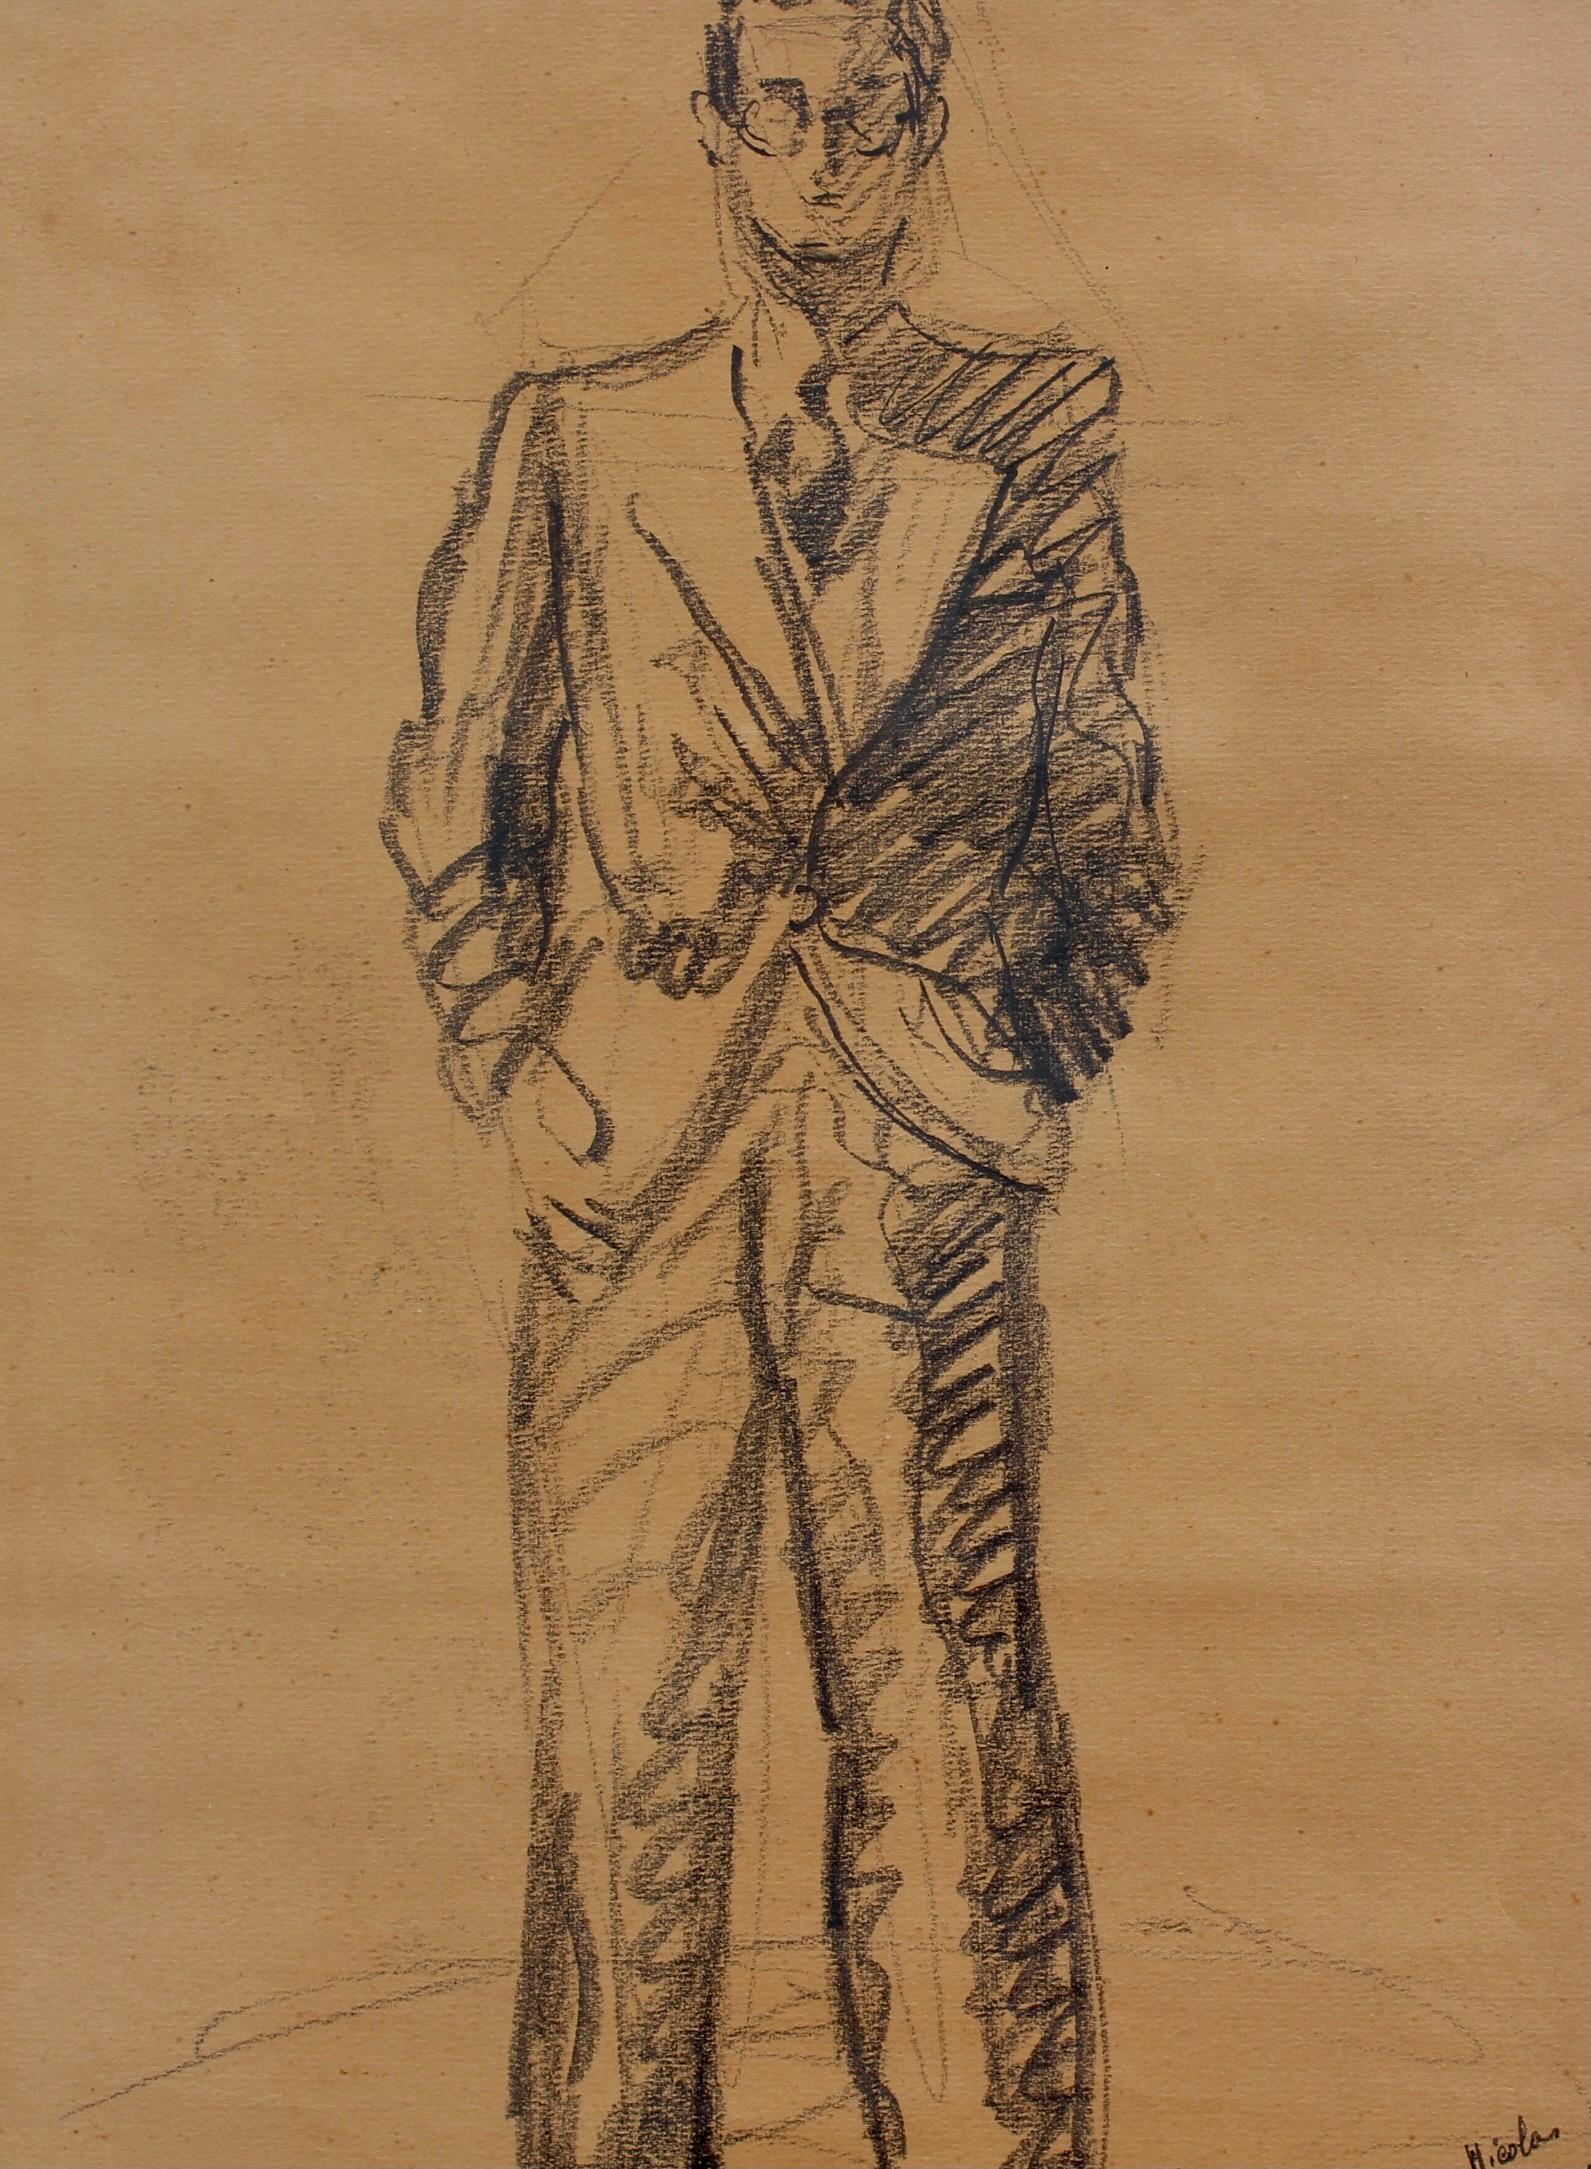 'Portrait of a Standing Man', charcoal on brown kraft paper, by Antoine Mortier (1938). Not best known for his portraiture, the assumption here is that the artist quickly yet skilfully sketched his friend, Nicolas, to whom this drawing was